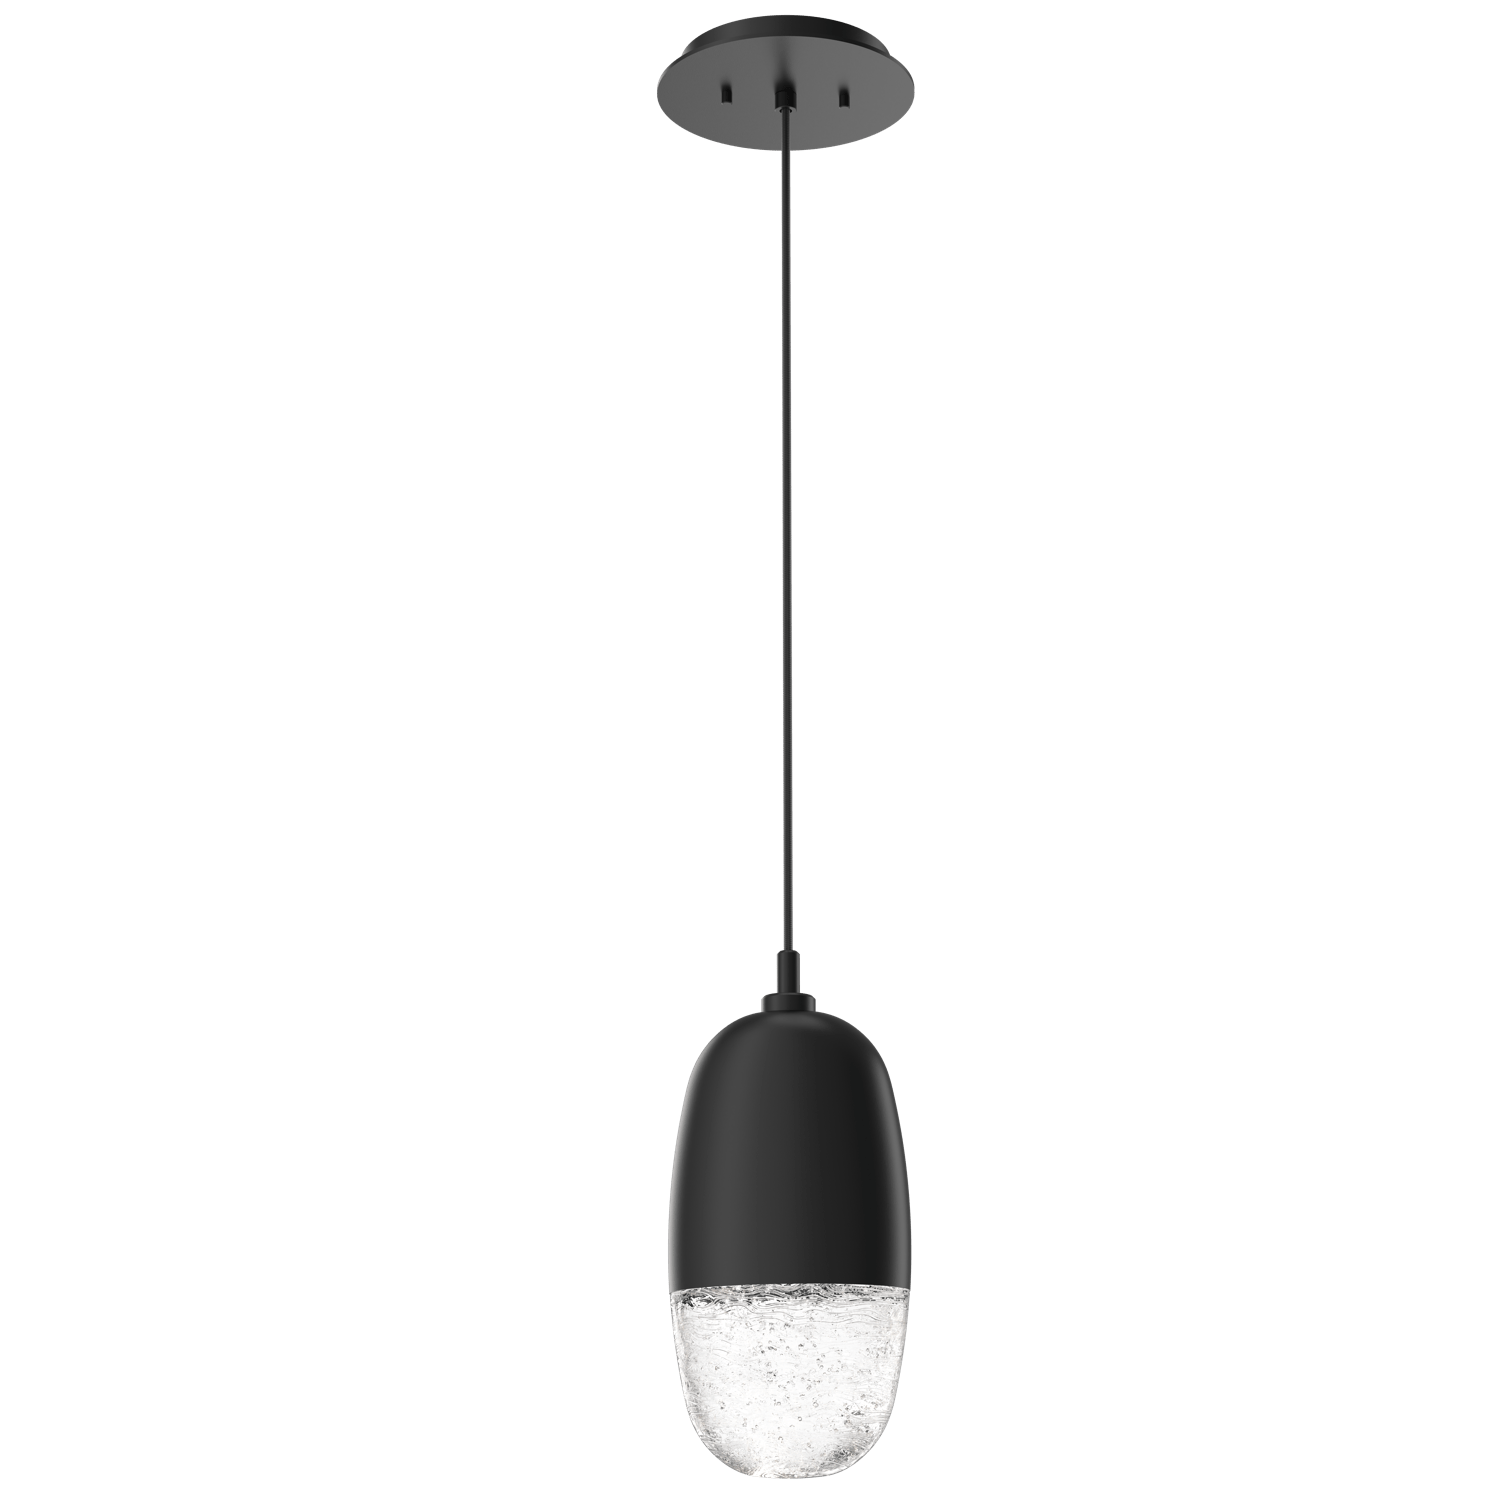 LAB0079-01-MB-Hammerton-Studio-Pebble-pendant-light-with-matte-black-finish-and-clear-cast-glass-shades-and-LED-lamping